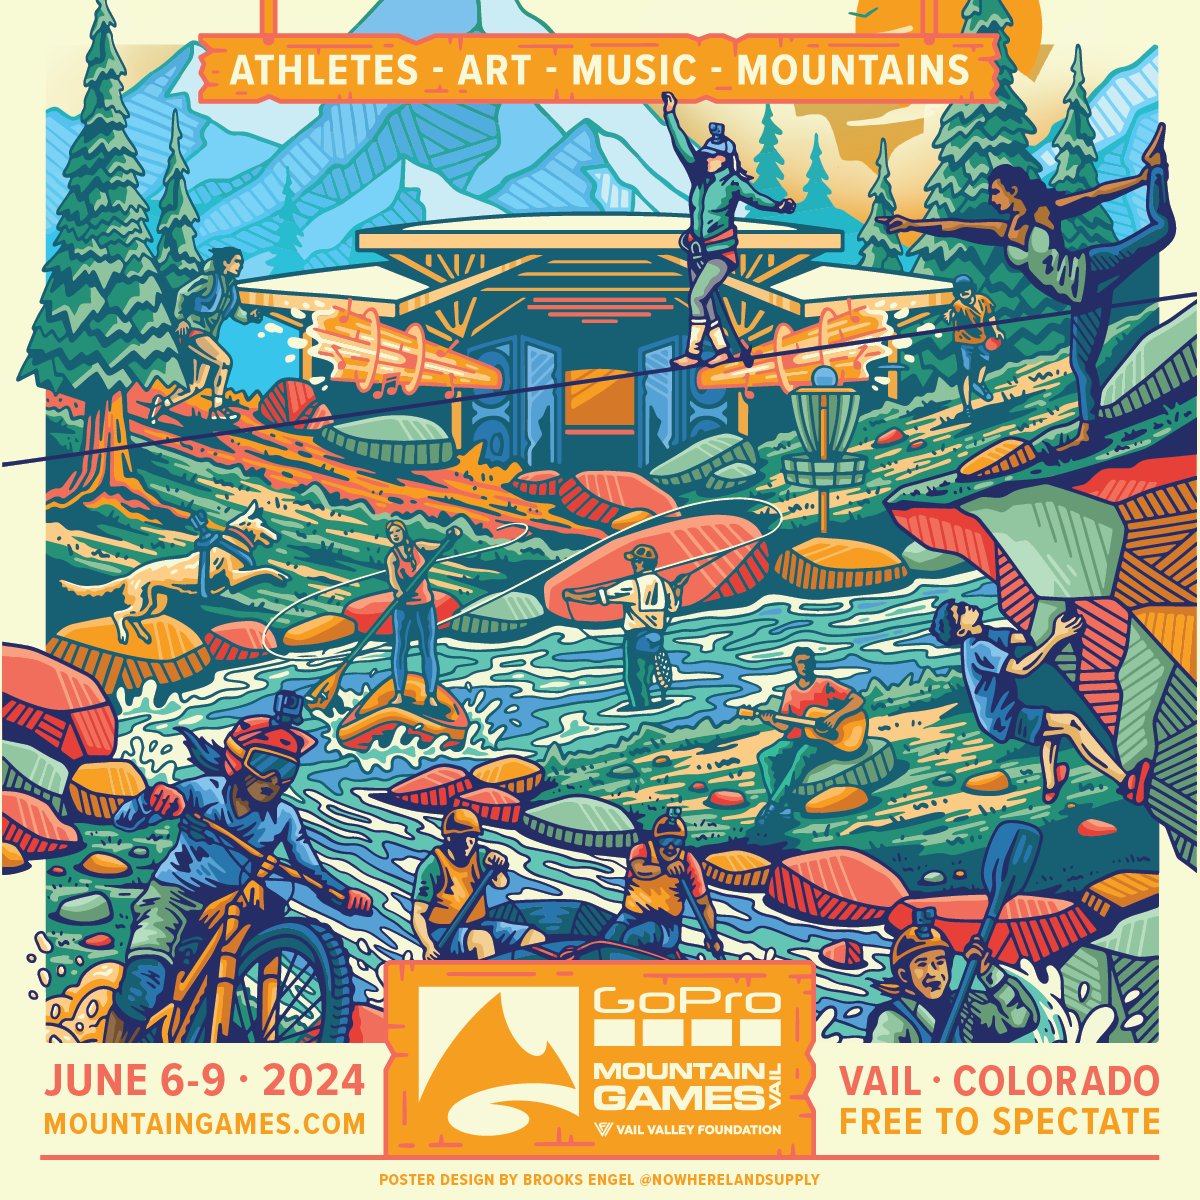 Excited to return as the Official Orthopaedic Partner for the GoPro Mountain Games in Vail, CO! Visit our expo booth from June 6-9. With over 30 competitions and a vibrant festival atmosphere, there's something for everyone to enjoy! #GoPro #VailColorado #GoProMountainGames